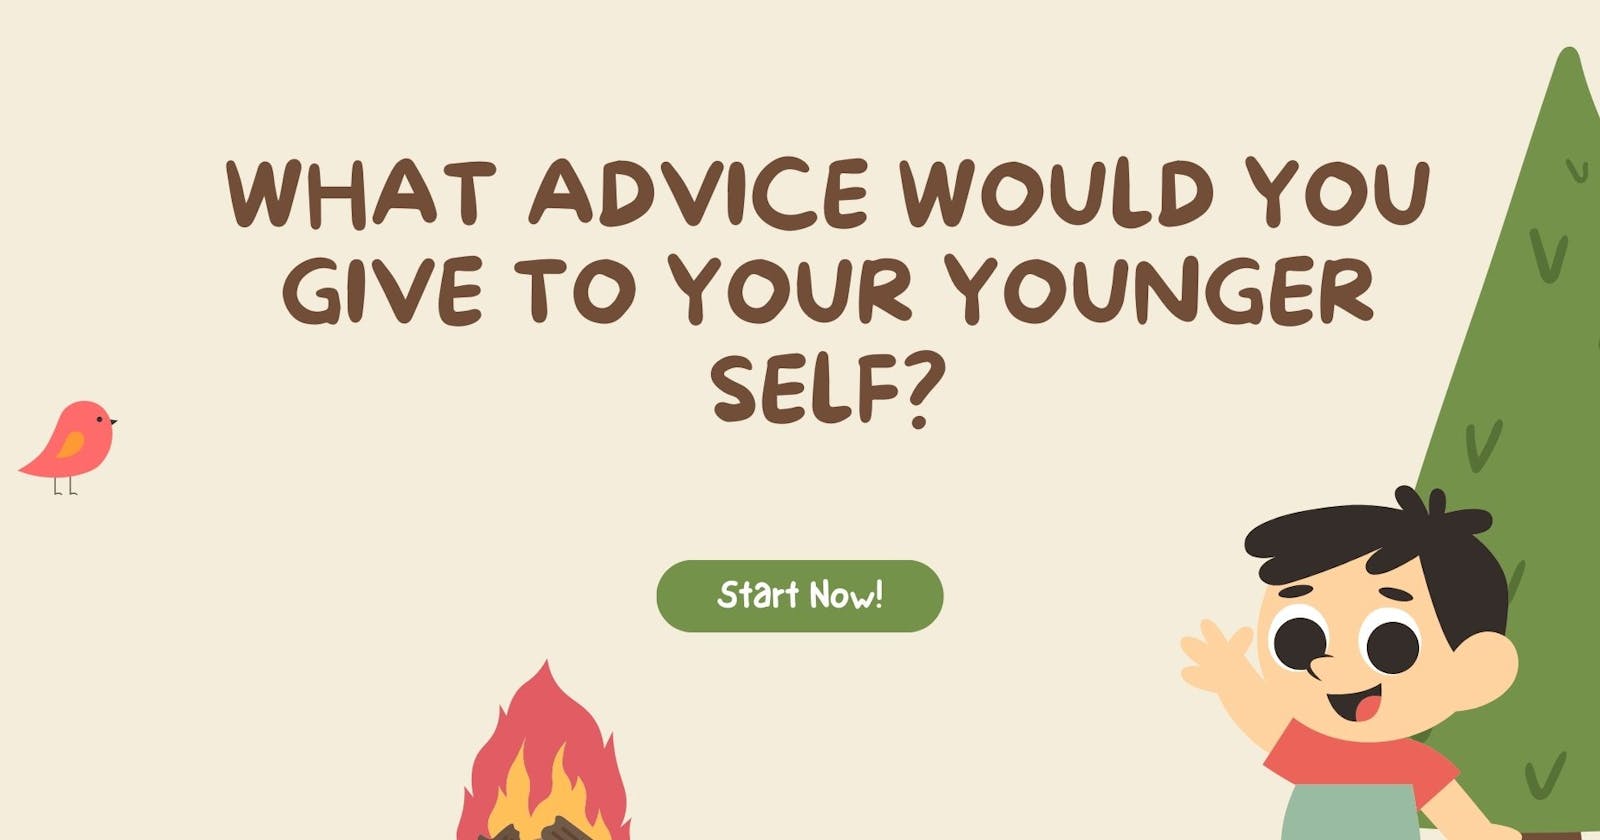 What advice would you give to your younger self?